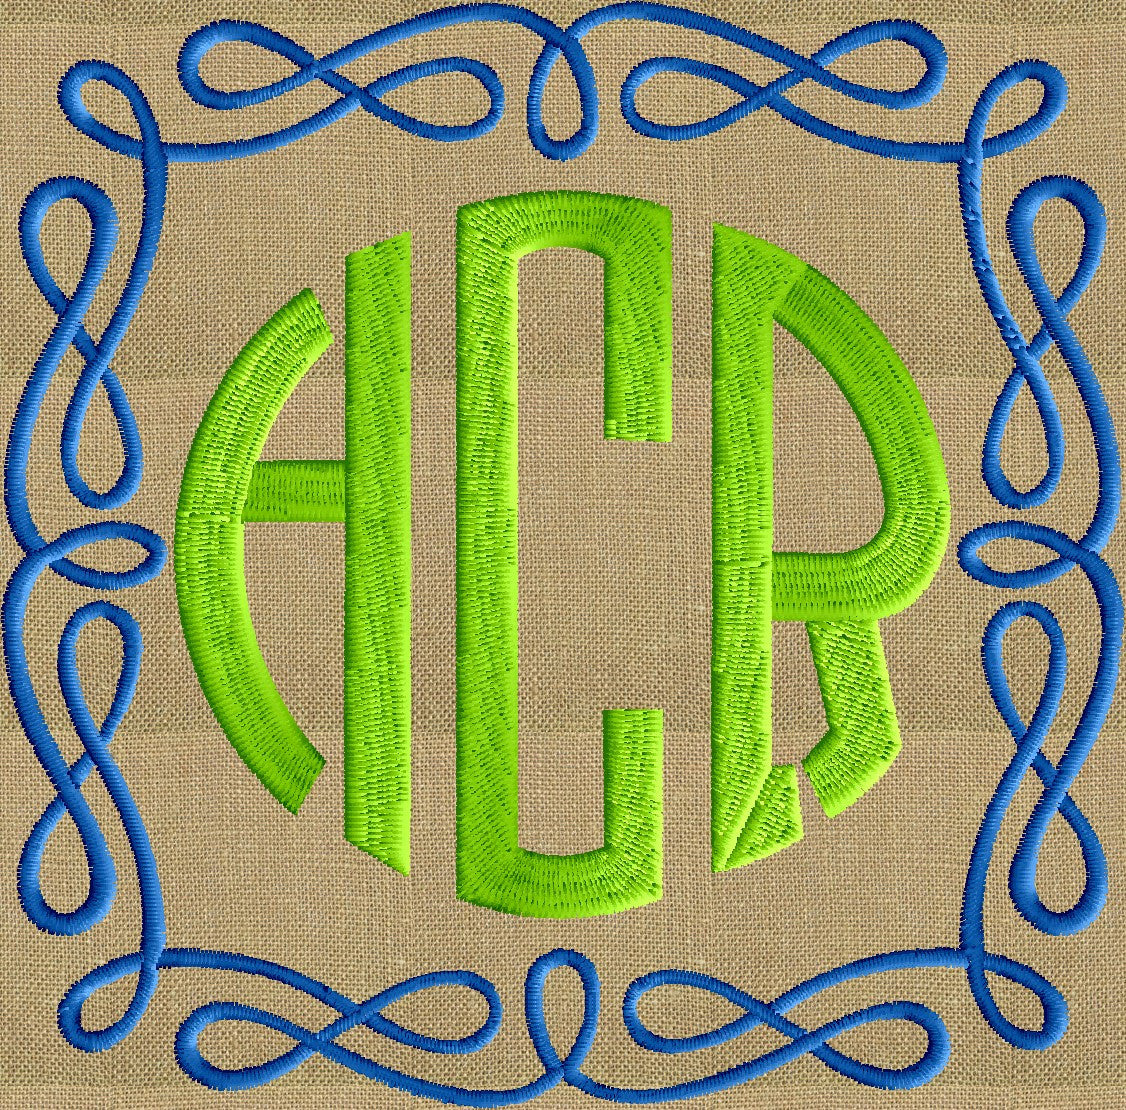 Infinite Frame Monogram -Font not included - EMBROIDERY DESIGN - Instant download